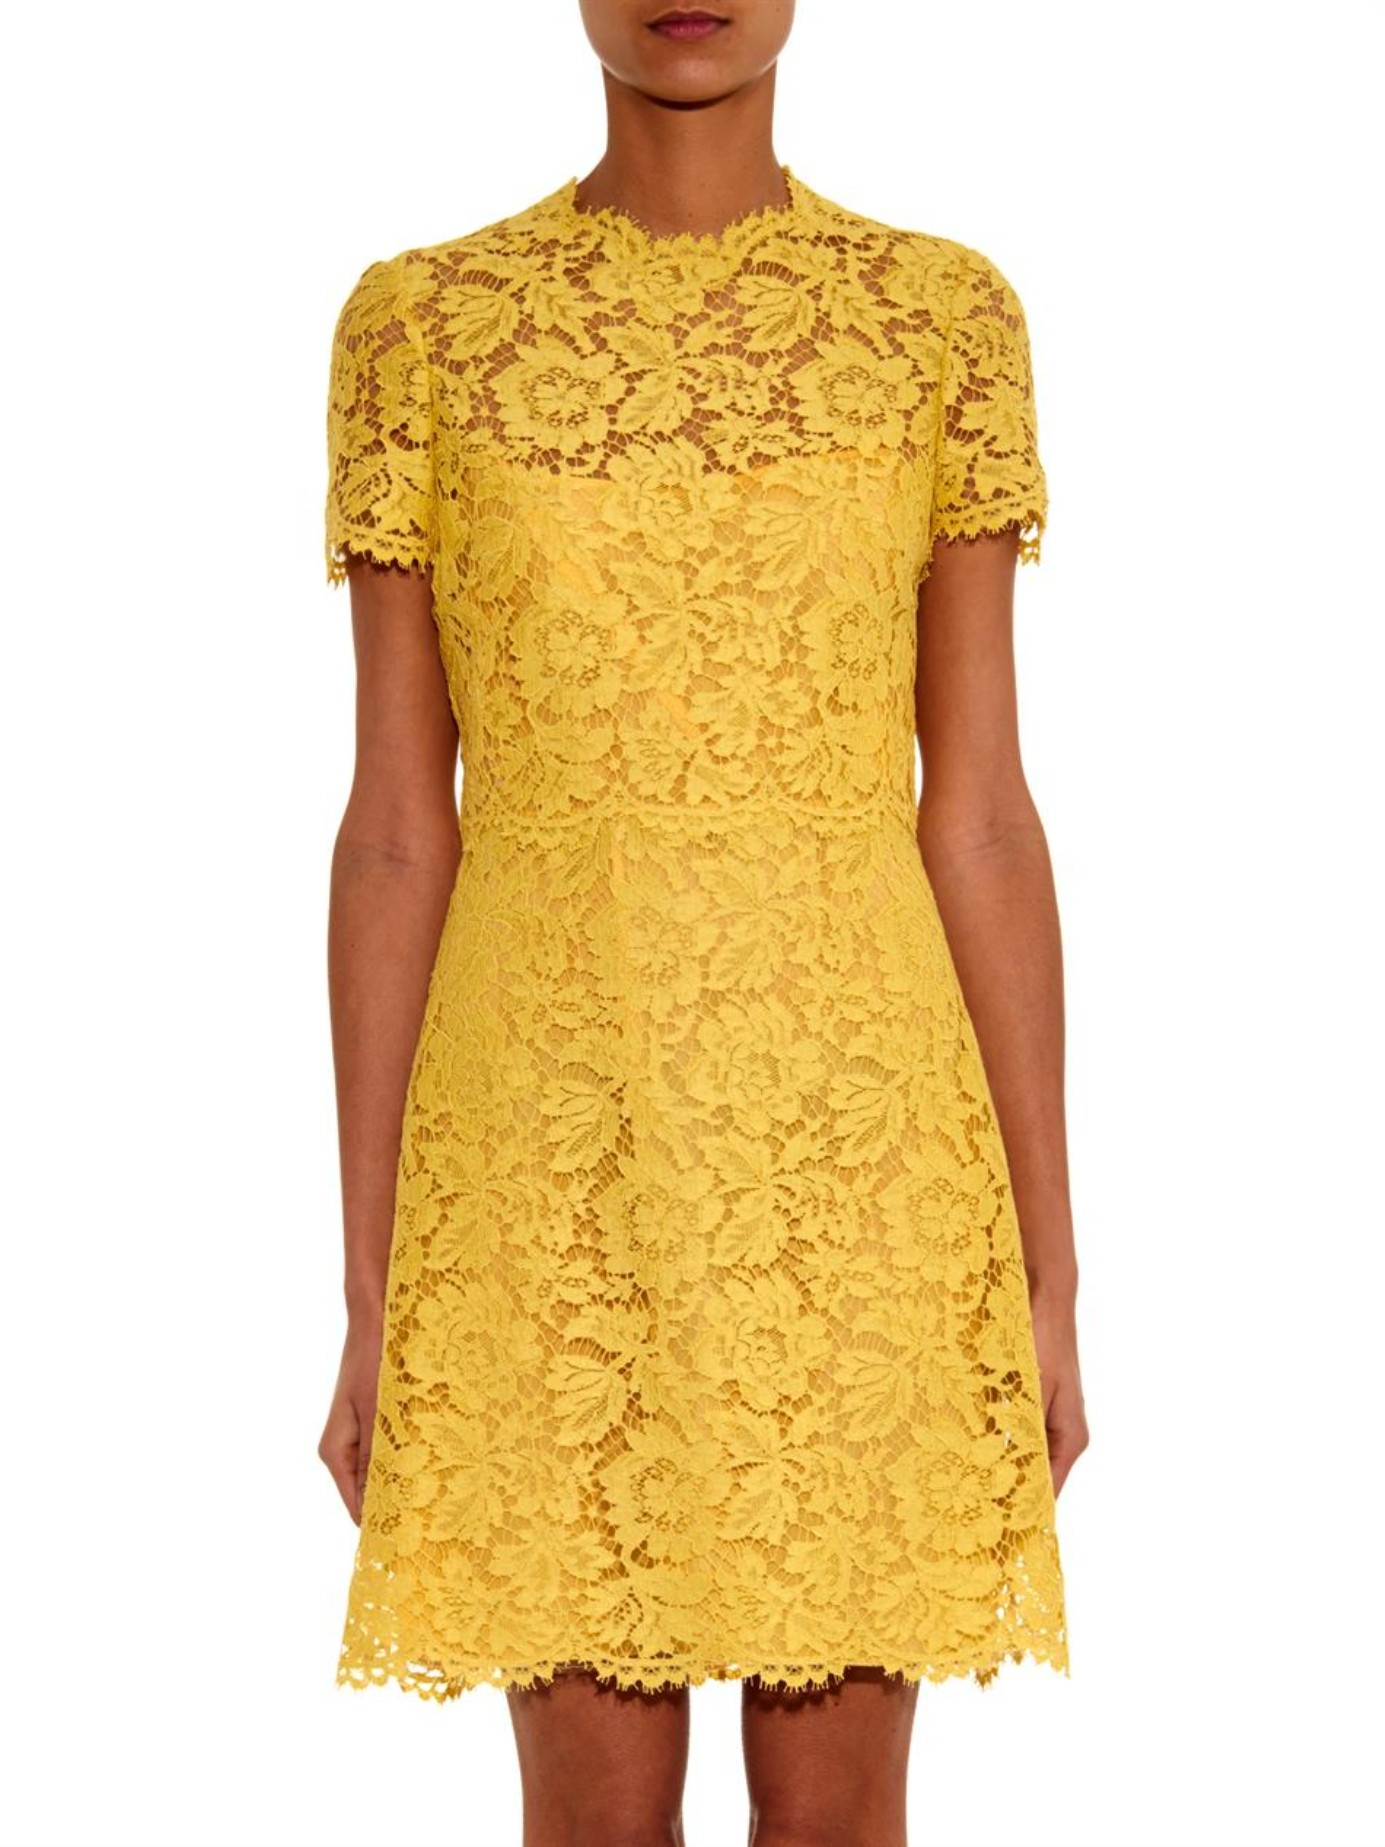 Lyst - Valentino Short-Sleeved Lace Dress in Yellow